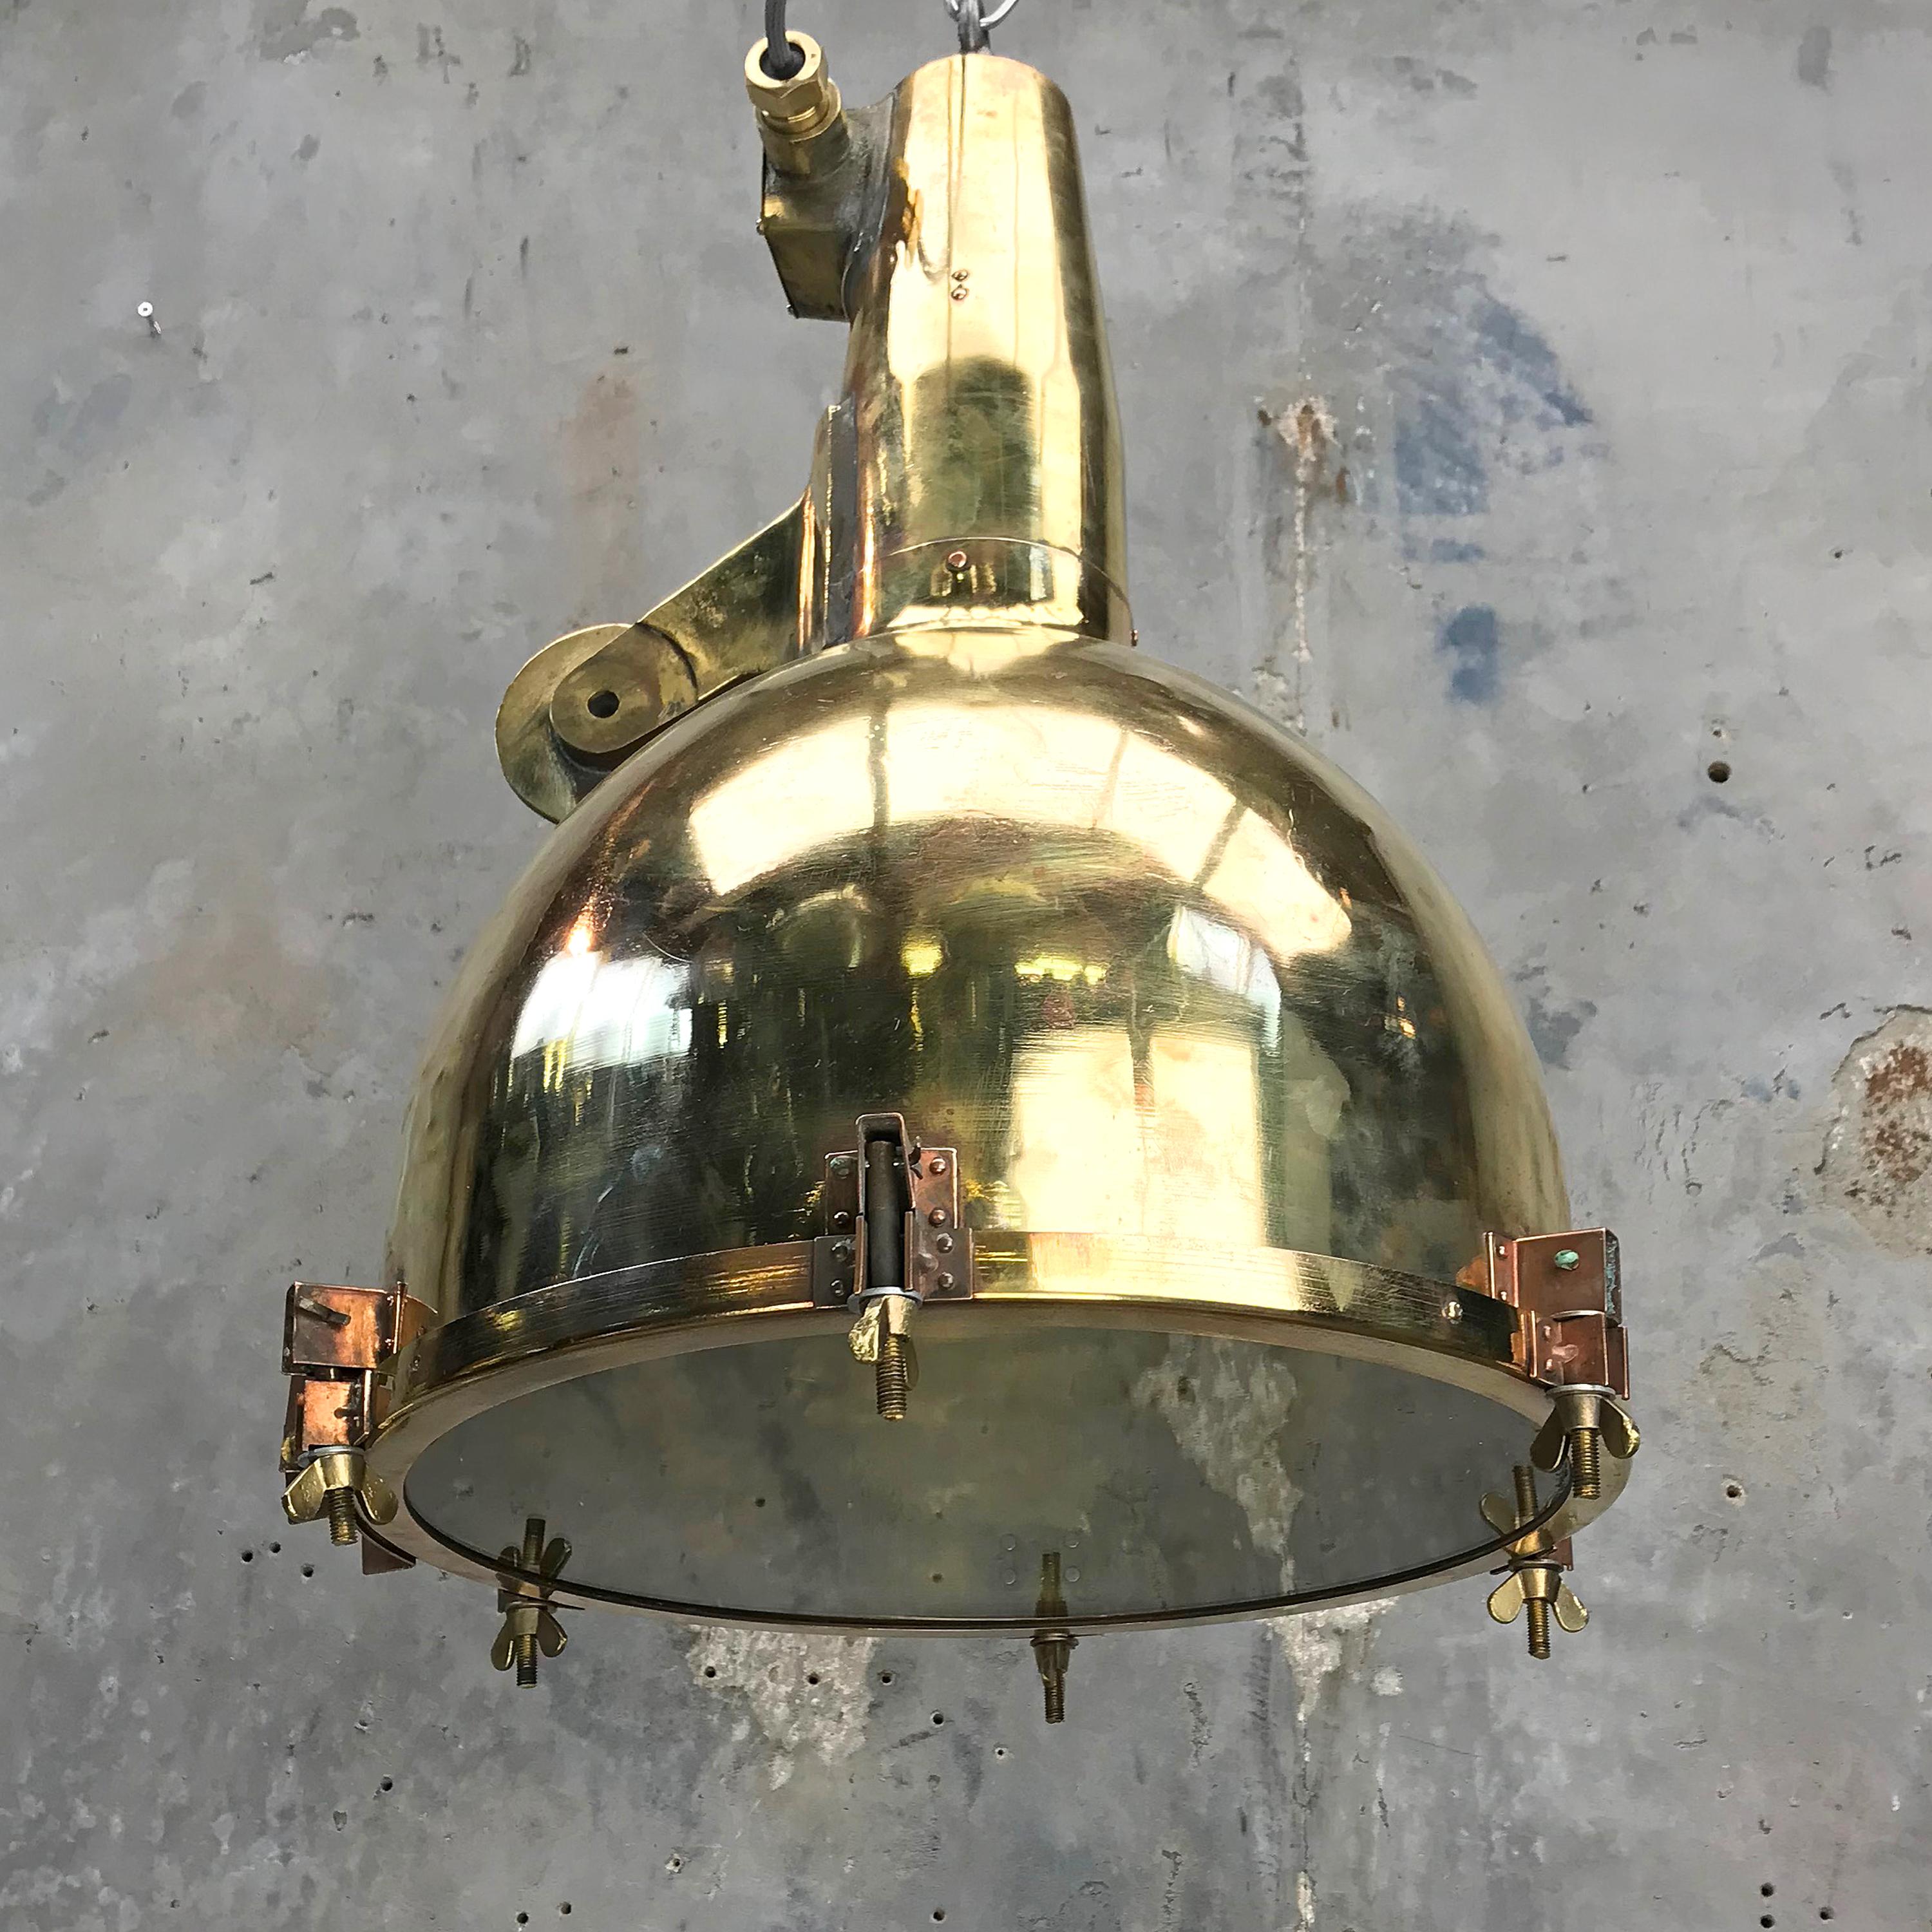 This super size fitting was salvaged from an old Japanese cargo ship built during the 1970s, these lights have travelled one million miles at sea!

We have expertly converted the search light to be a pendant for down lighting areas such as